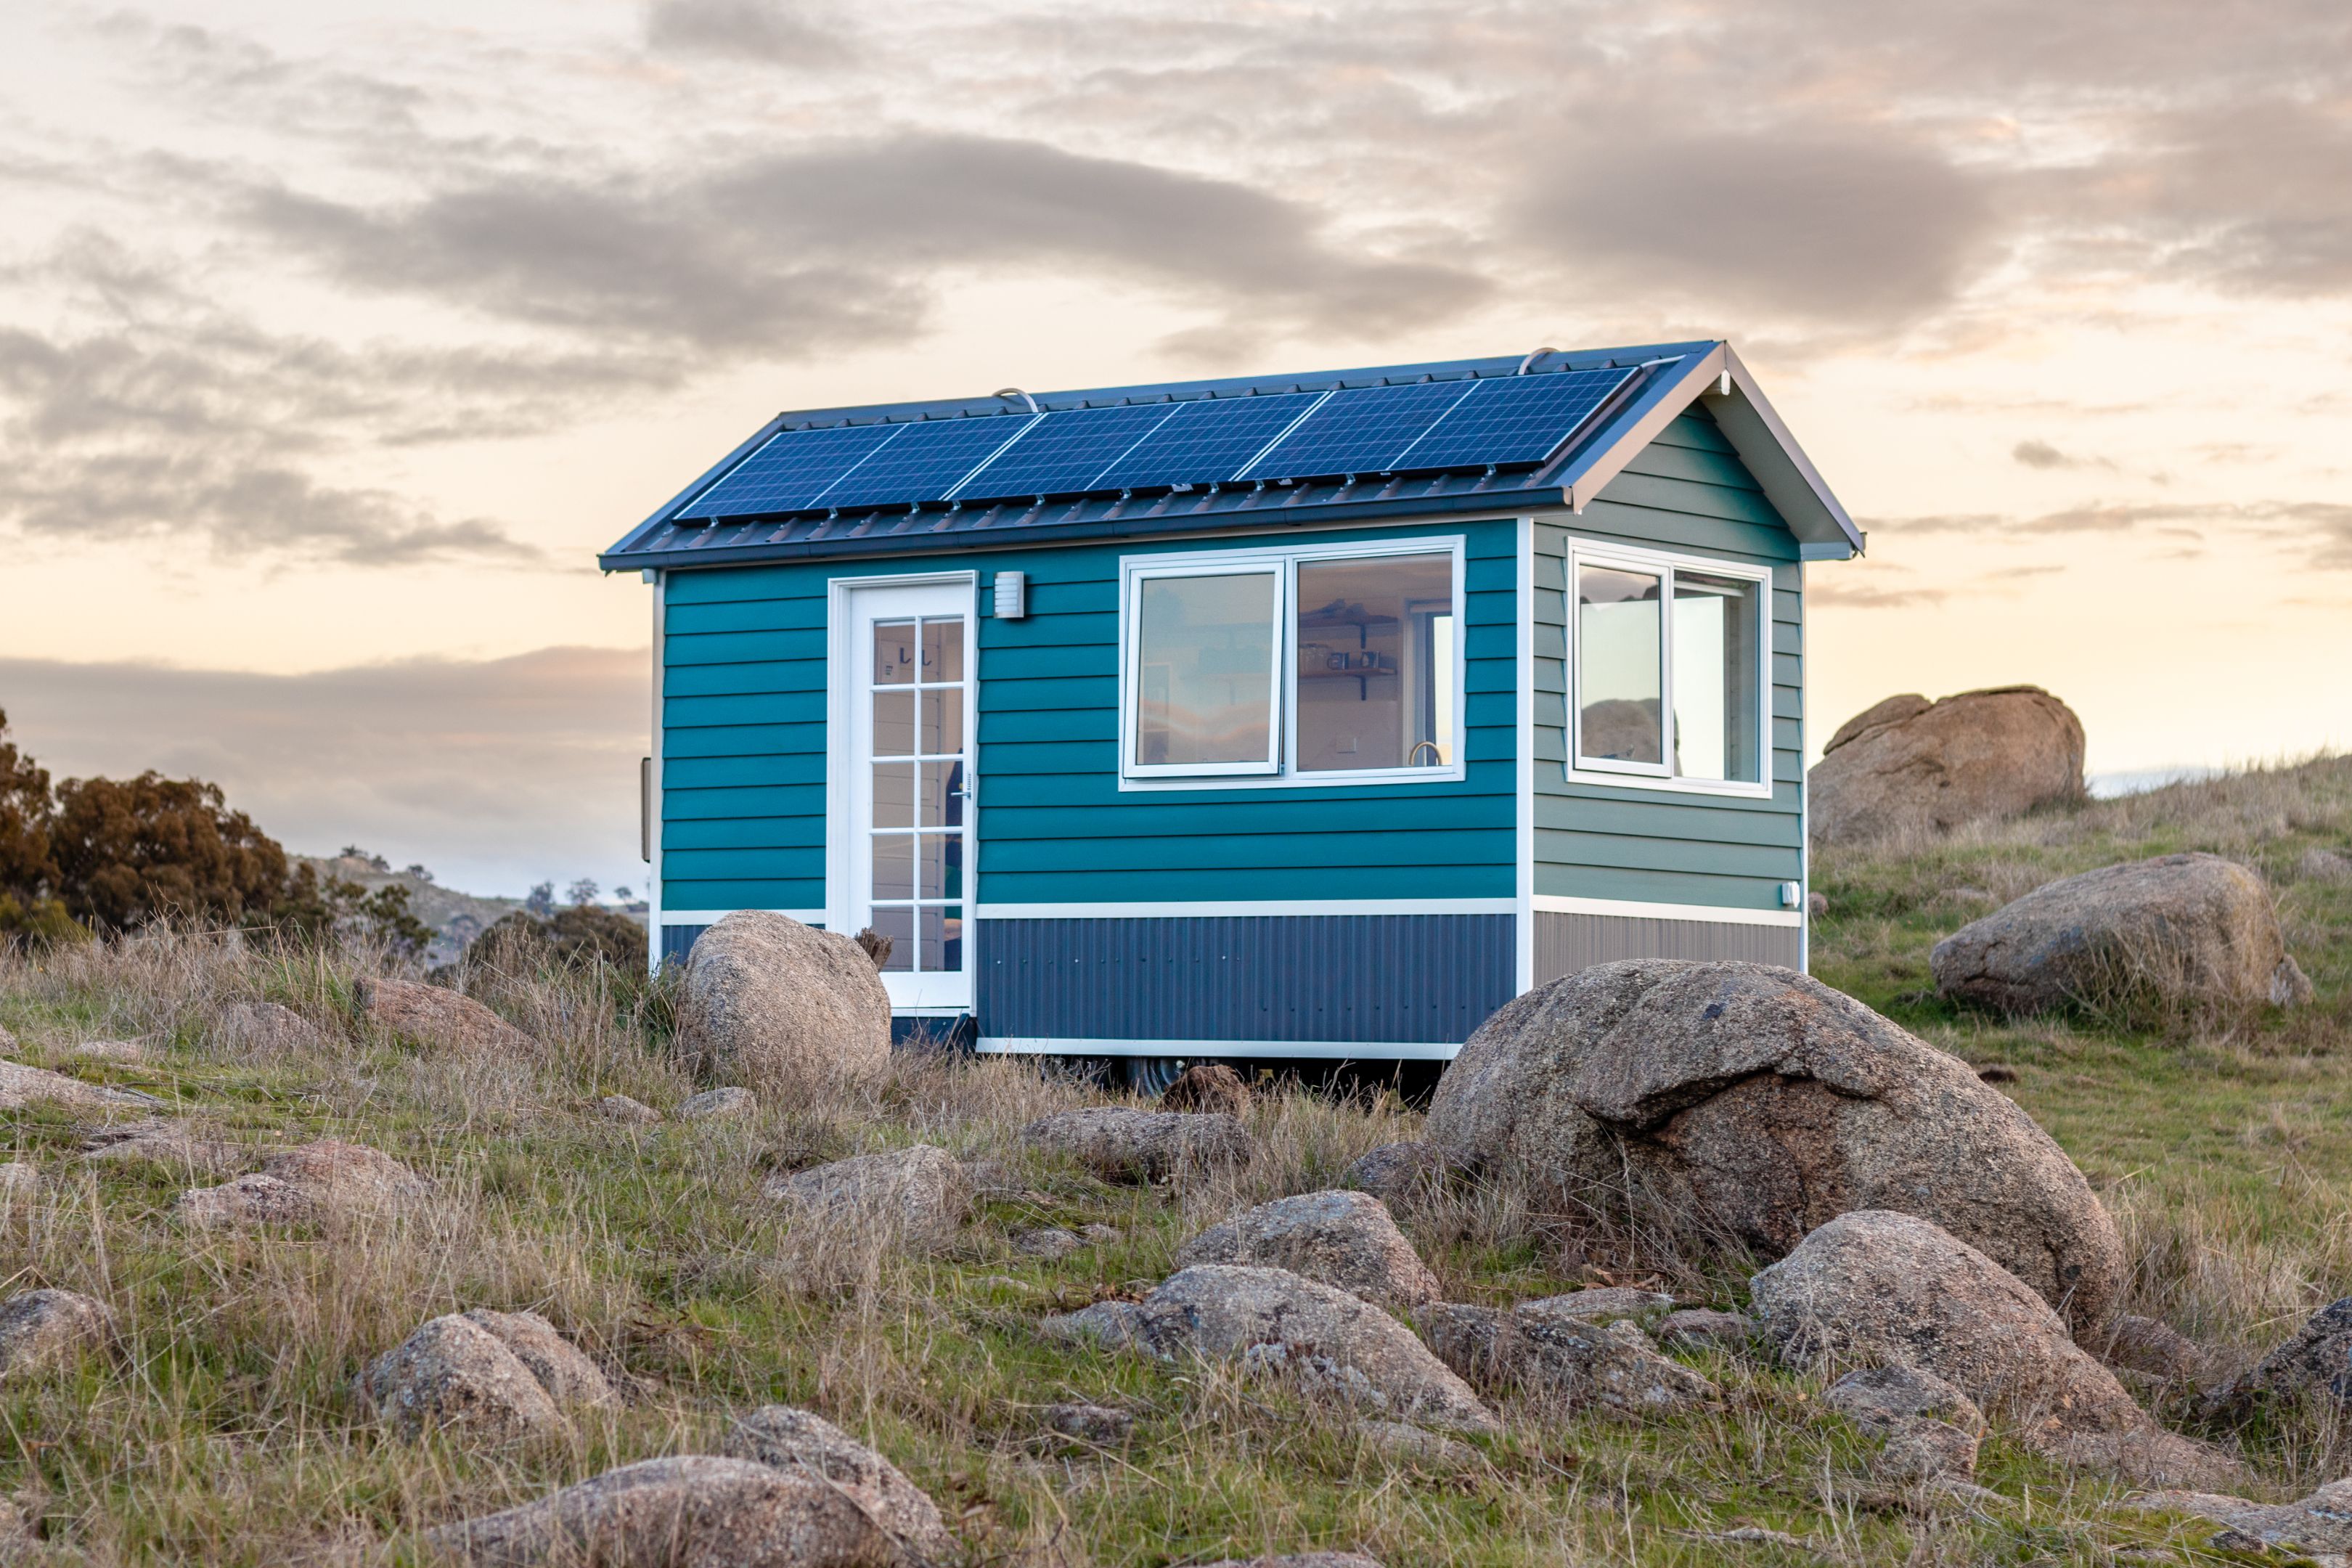 A tiny blue cottage is nested among large rocks, green grass and a rich sunset